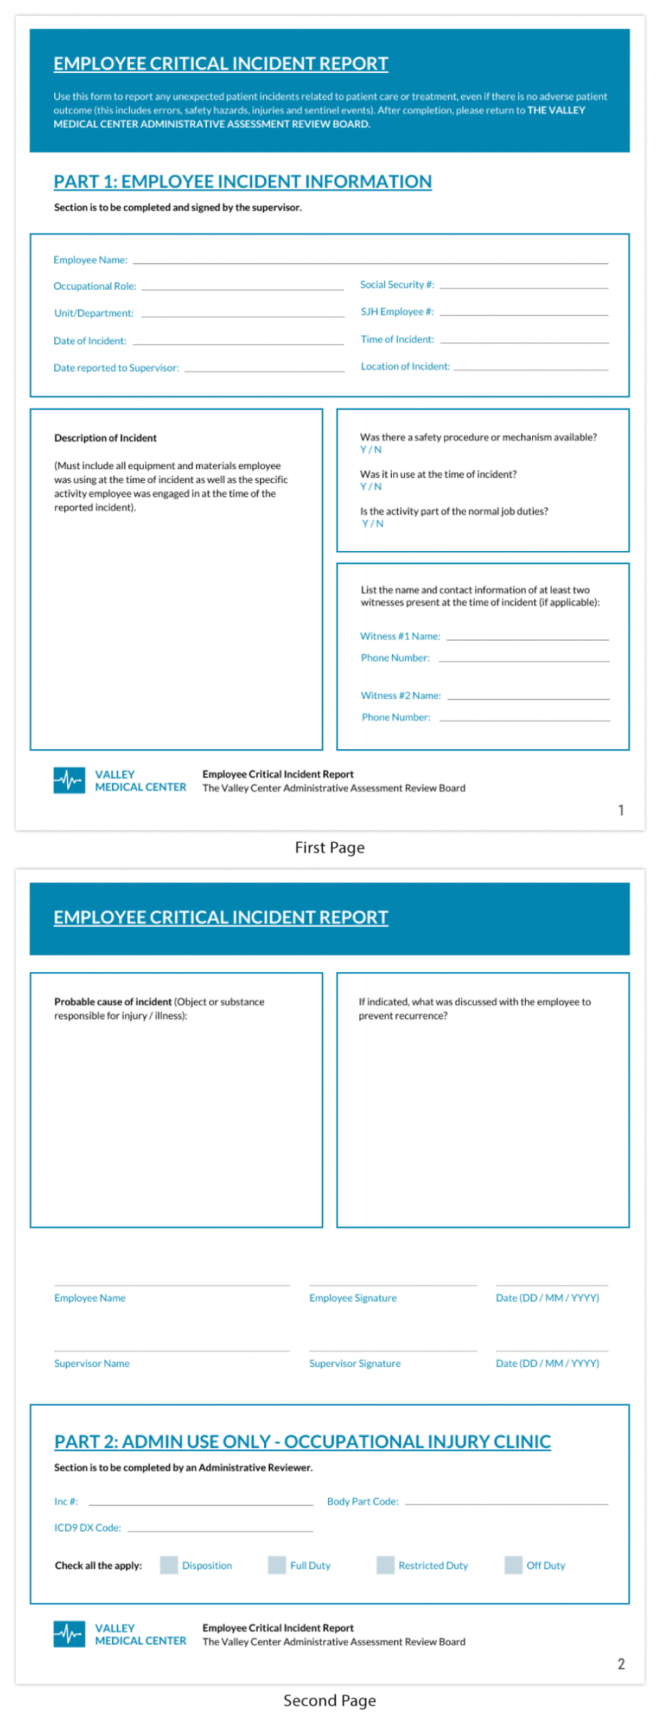 How To Write An Effective Incident Report [+ Templates] pertaining to Health And Safety Board Report Template